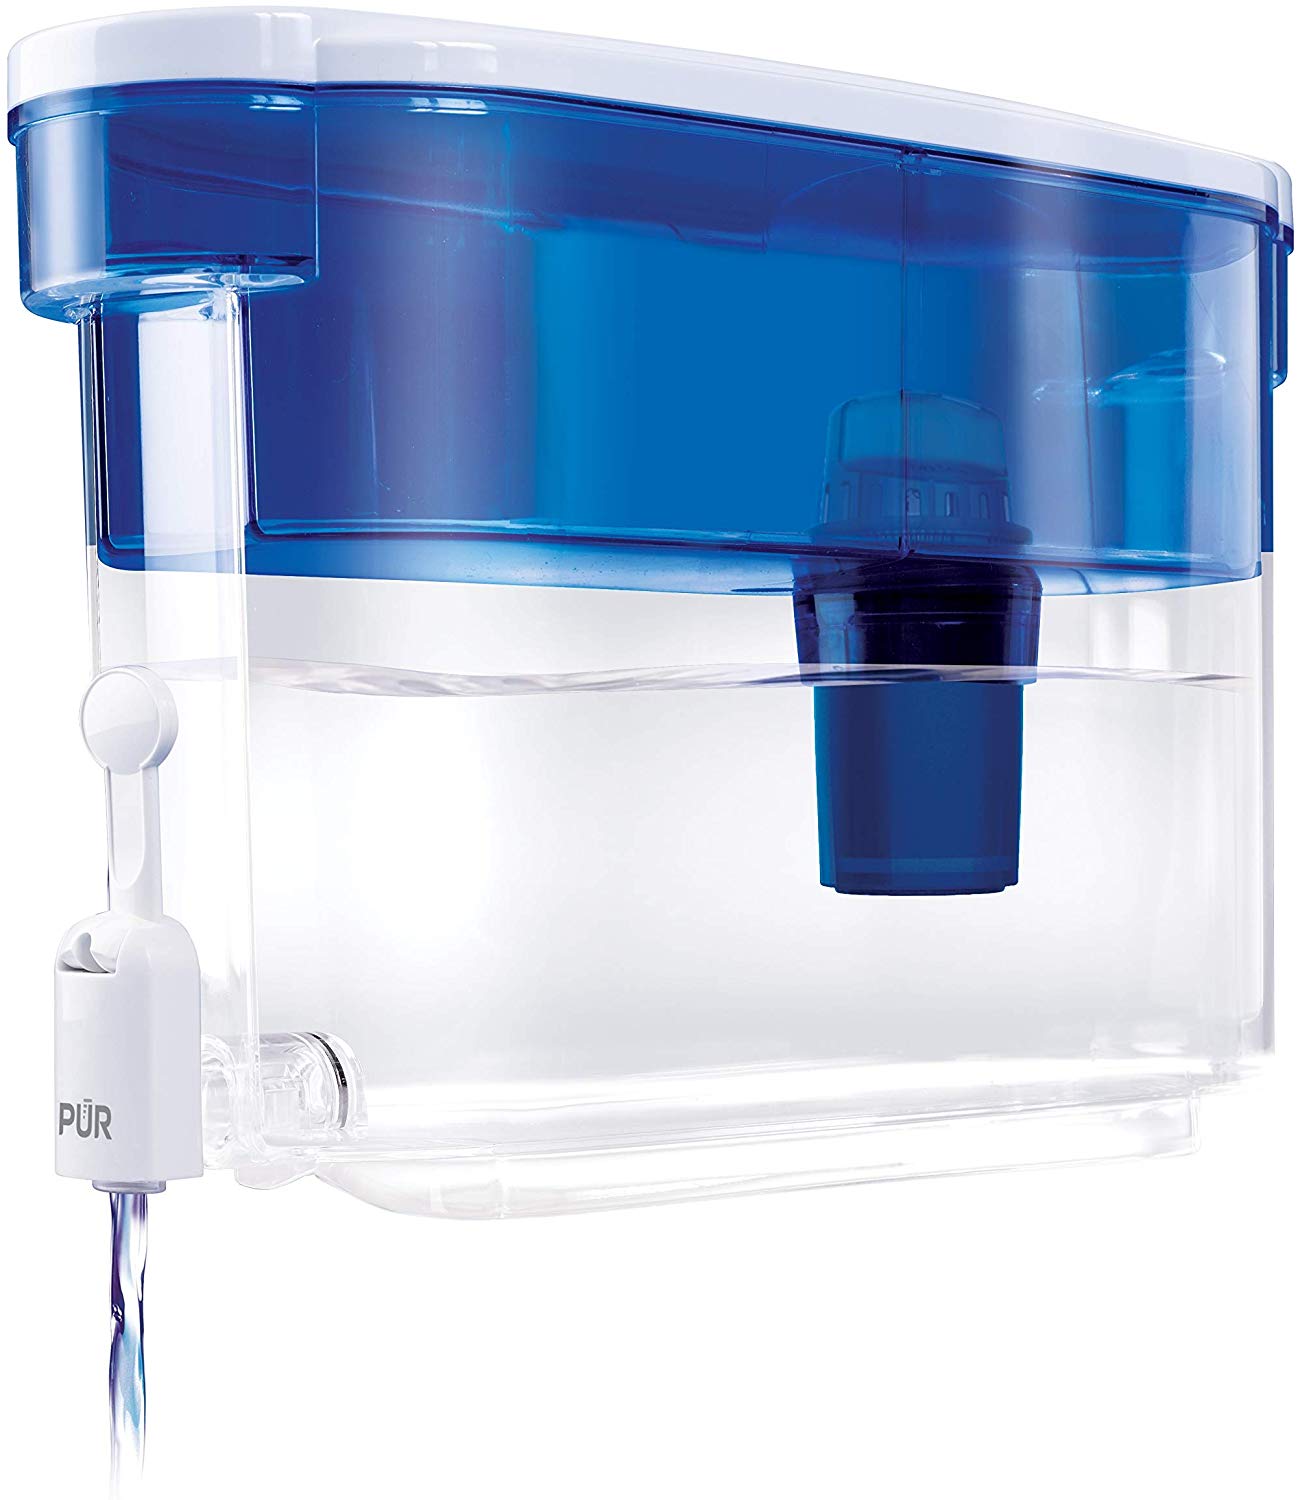 PUR 30 Cup Dispenser Water Filtration System, DS1800Z, Blue/White - image 1 of 12